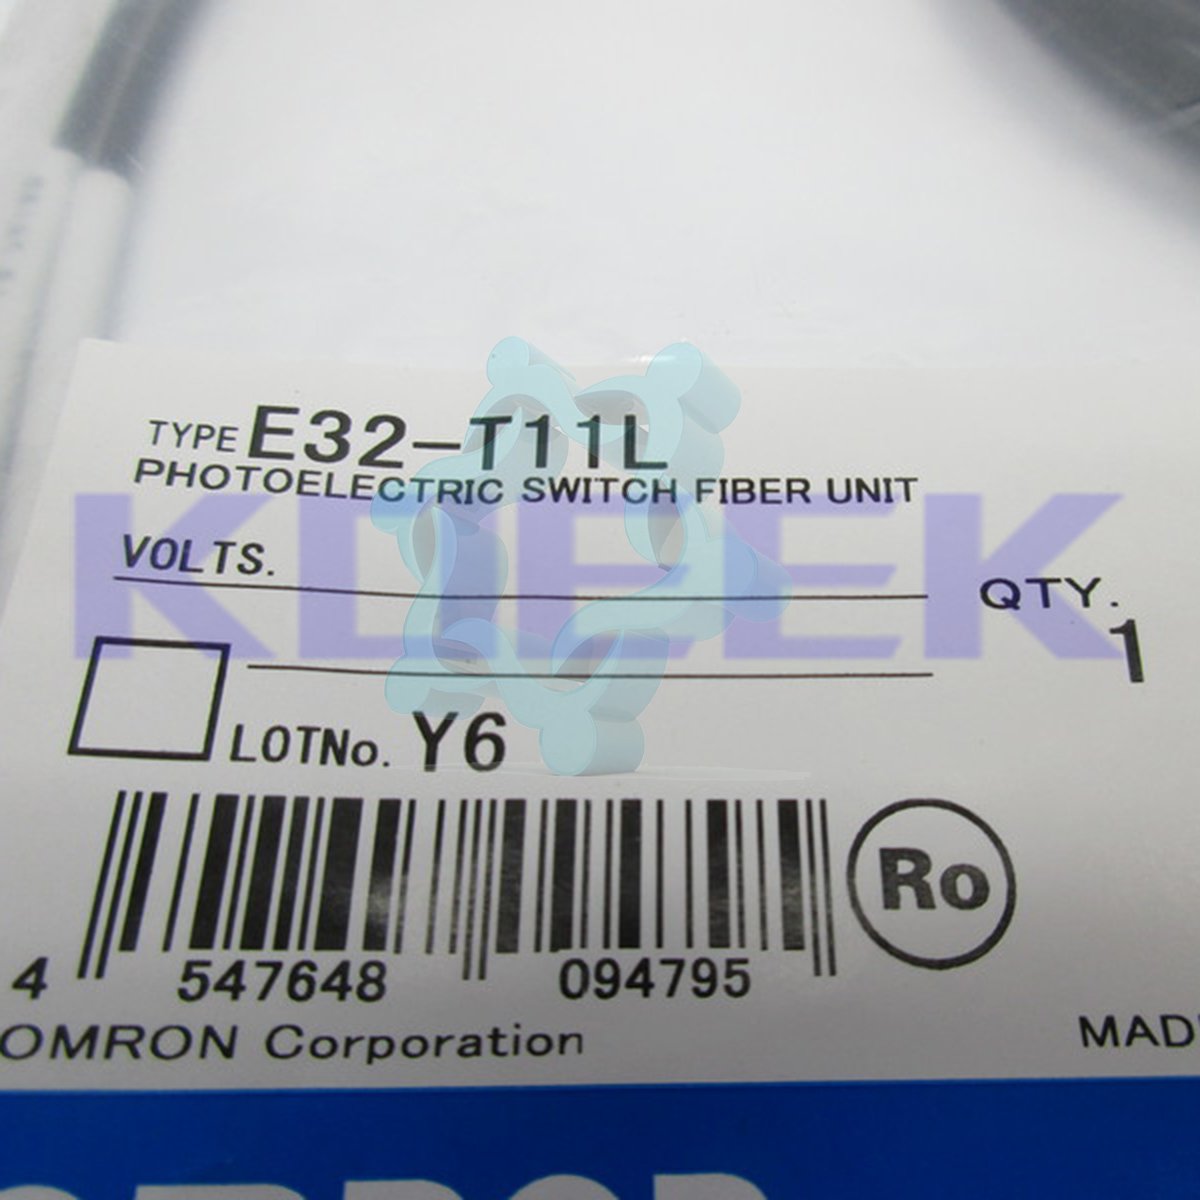 E32-T11L KOEED 1, 80%, import_2020_10_10_031751, Omron, Other